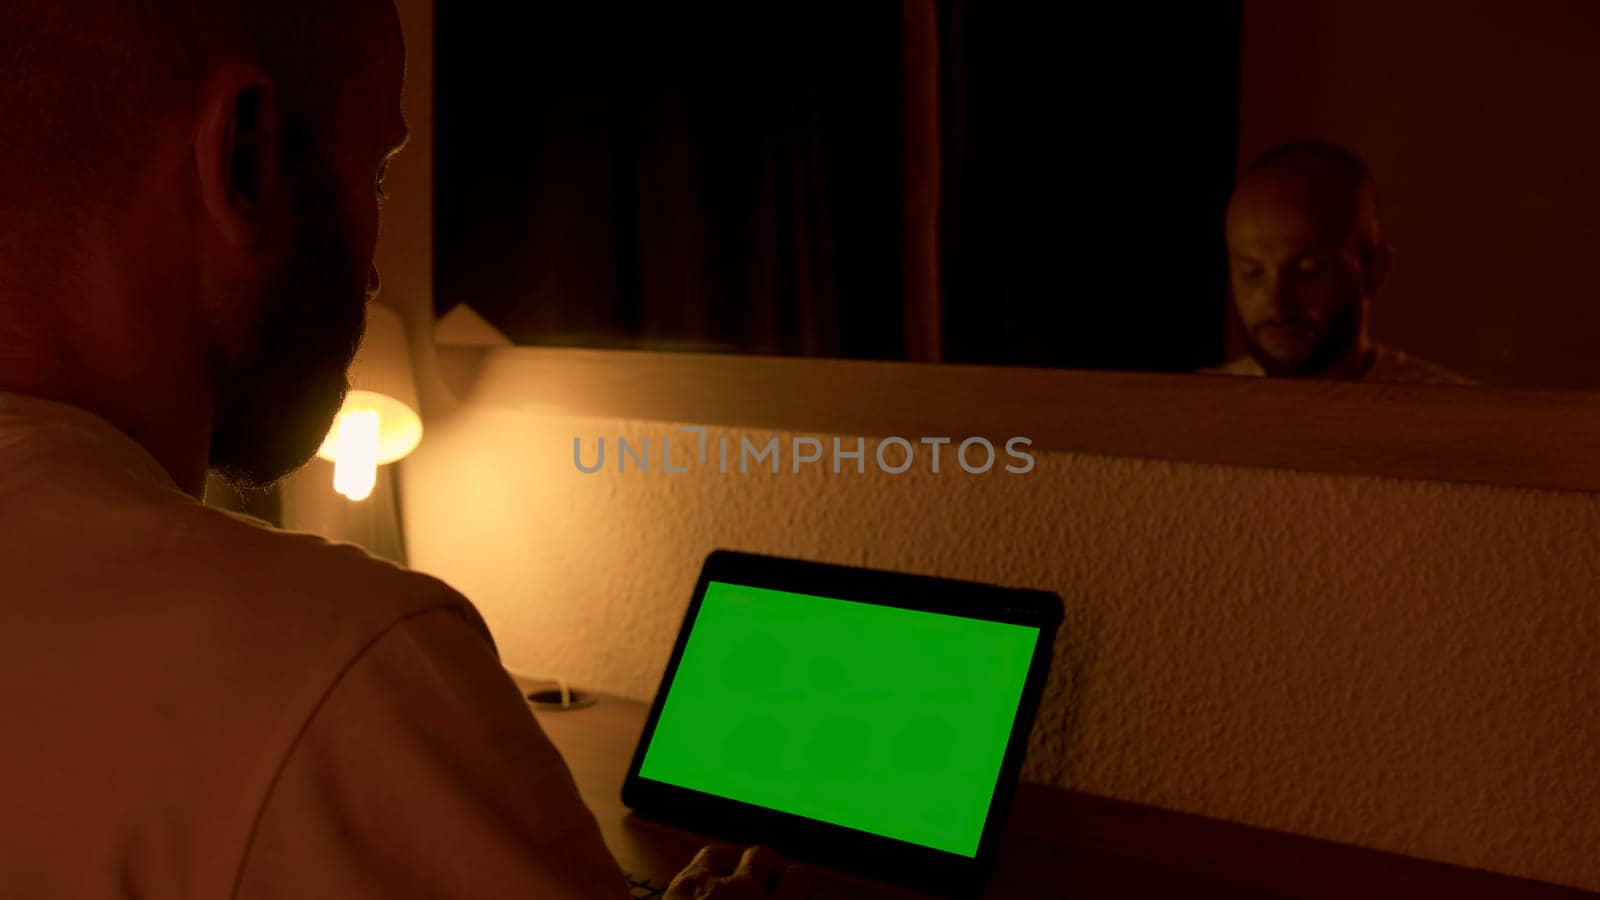 View over the shoulder of a businessman working on laptop with green chroma key screen. Media. Young man working at the computer late at night in front of a mirror